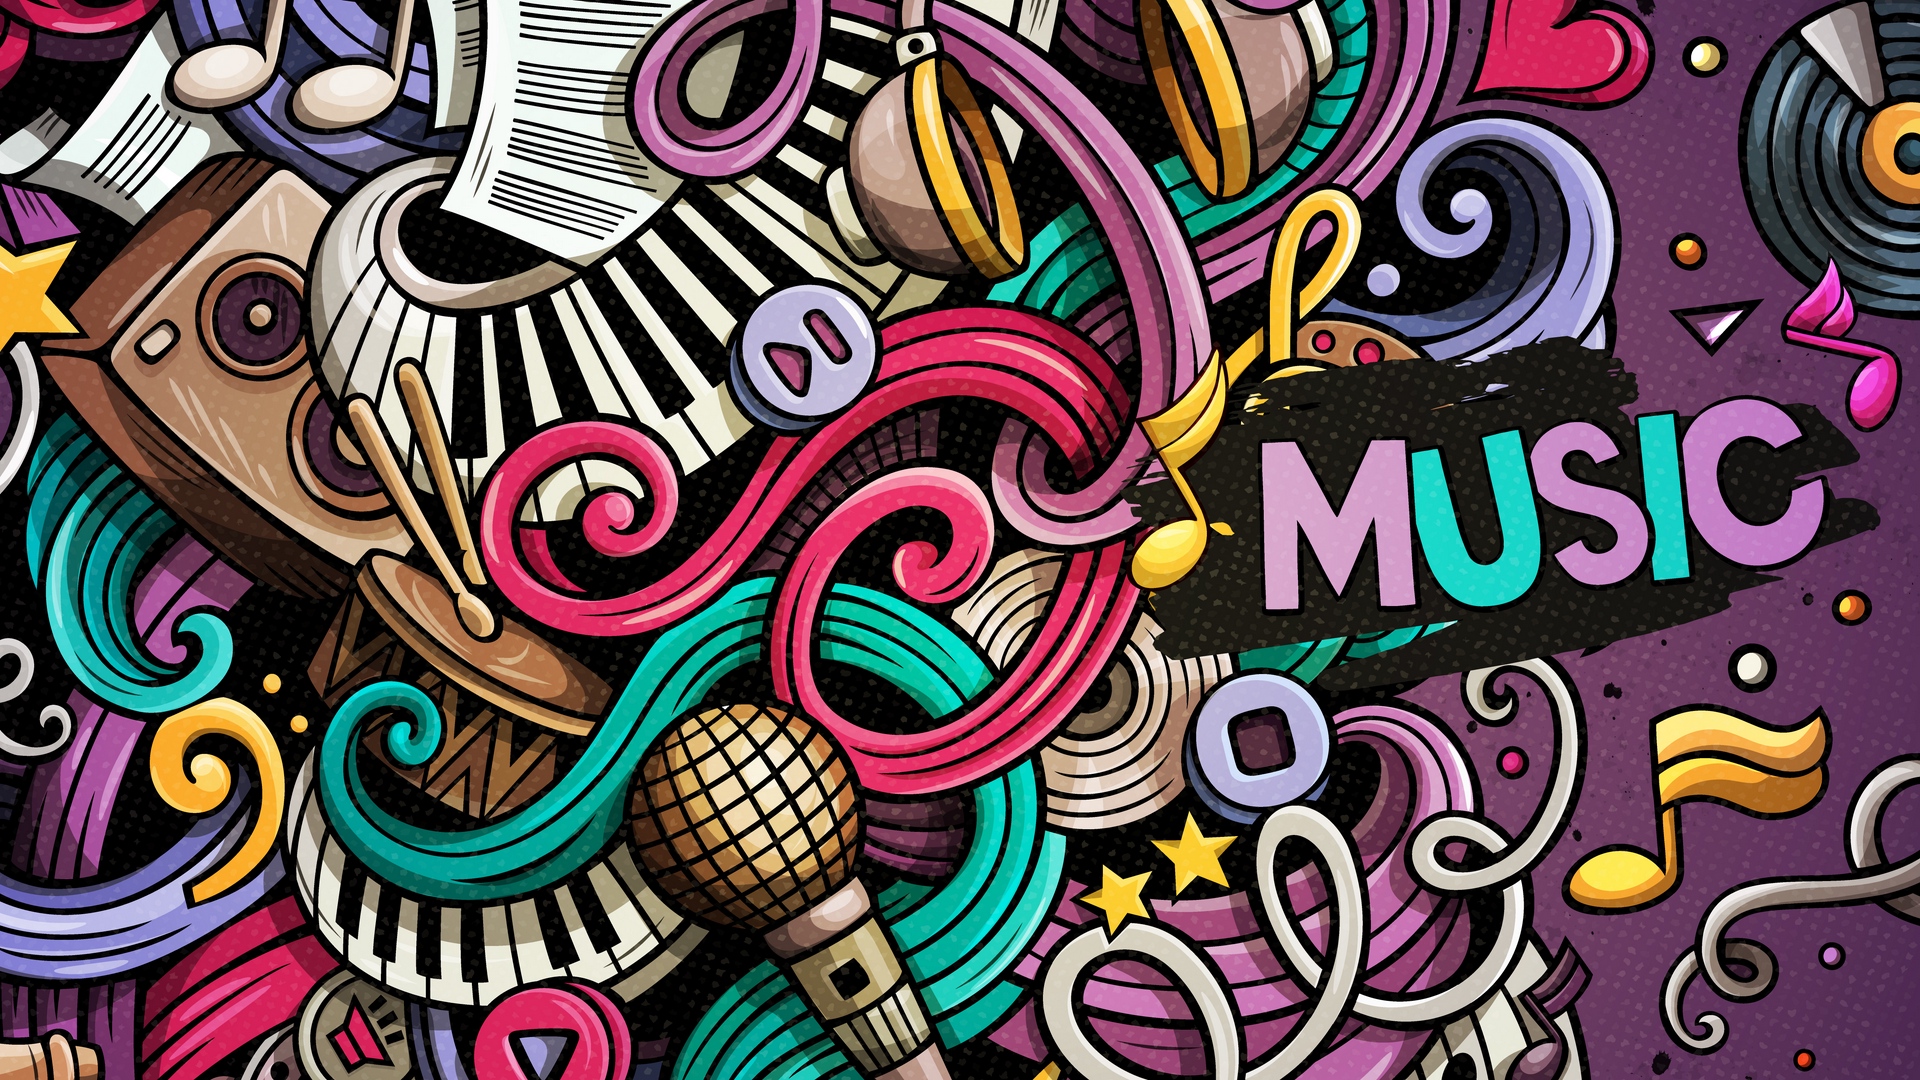 Wallpaper Music, Doodles, Colorful, Musical Instruments, - Doodle Wallpaper  Hd Iphone - 1366x768 Wallpaper 